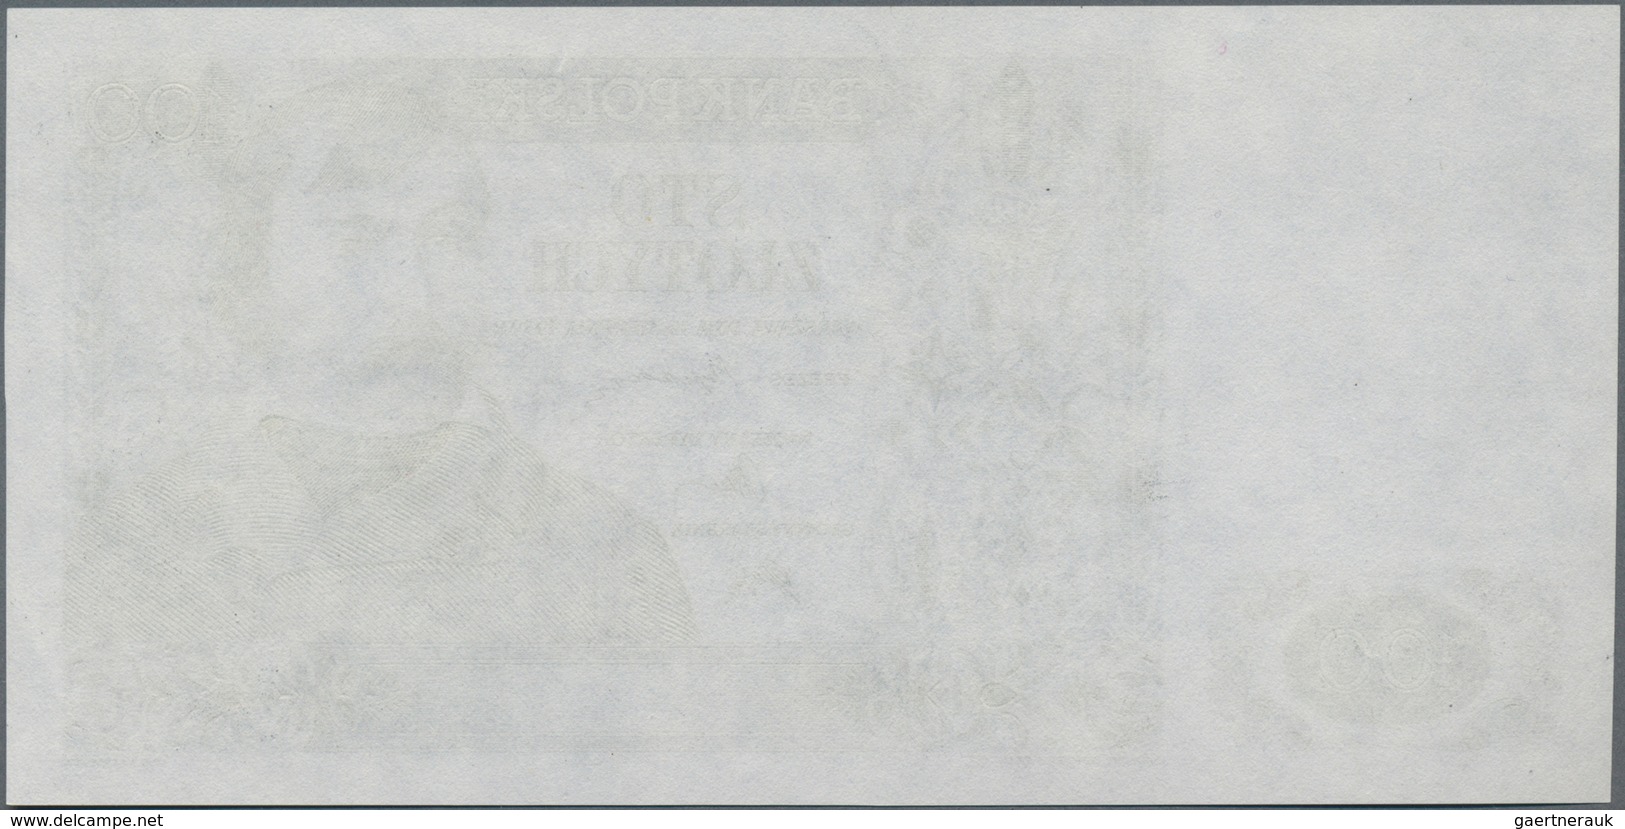 Poland / Polen: Bank Polski, Intaglio Printed Uniface Proof Of Front And Reverse Of The Unissued 100 - Pologne